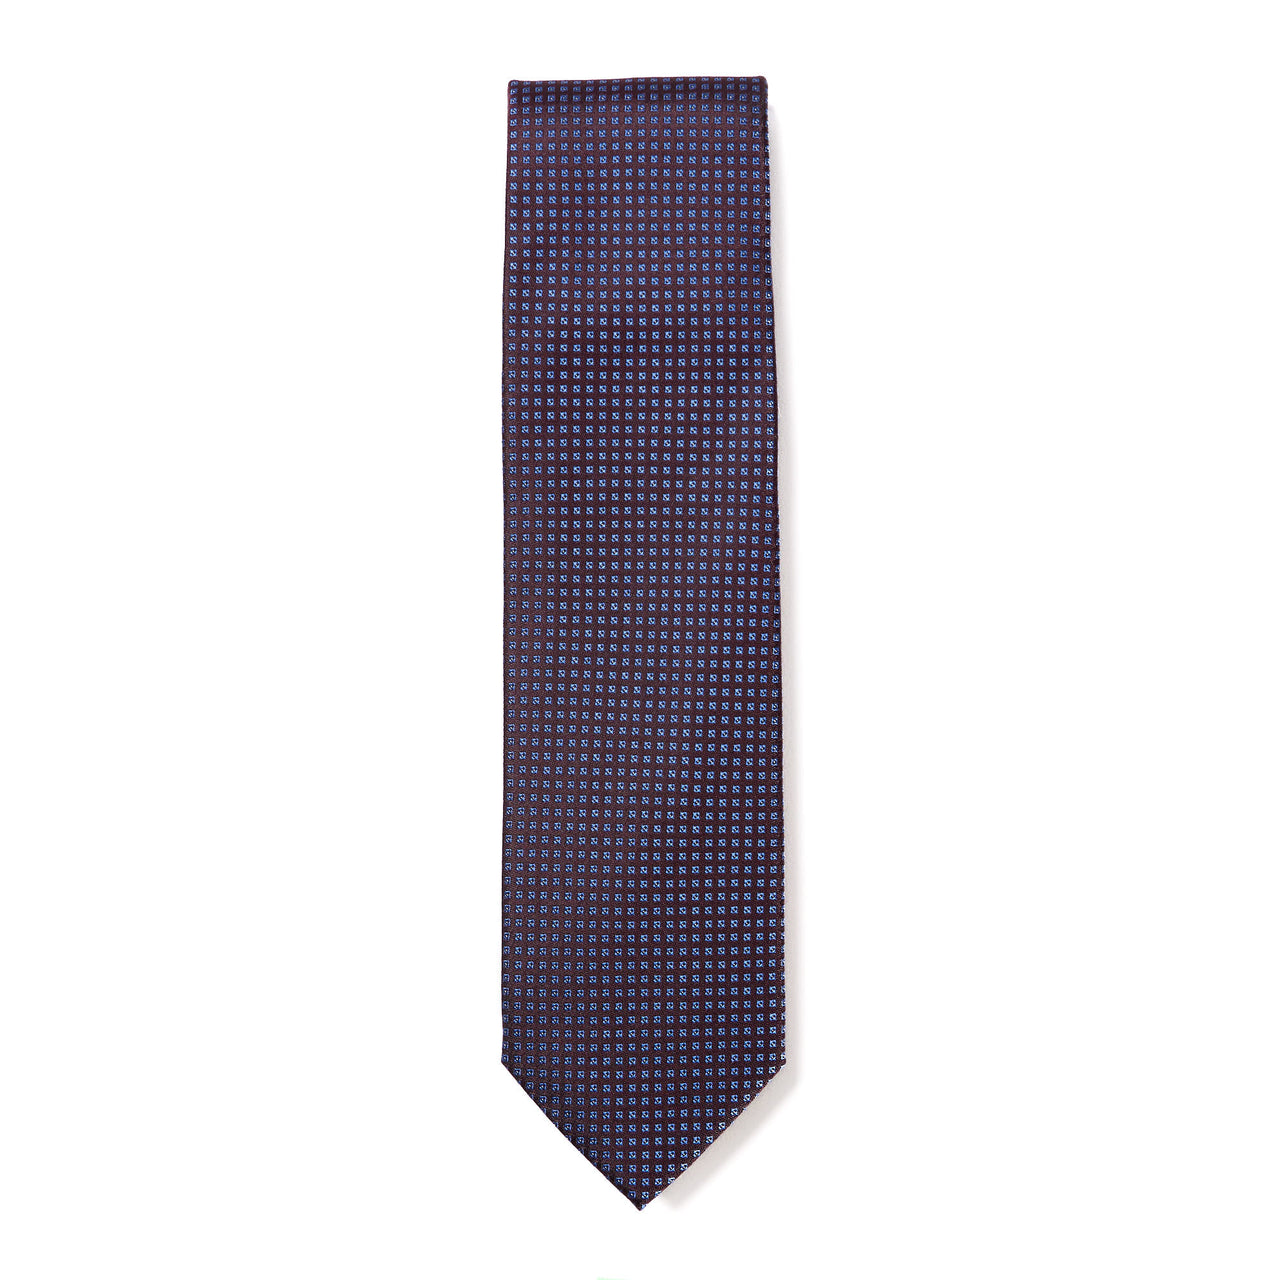 HENRY SARTORIAL X CANTINI Woven Pattern Tie BURGUNDY/NAVY